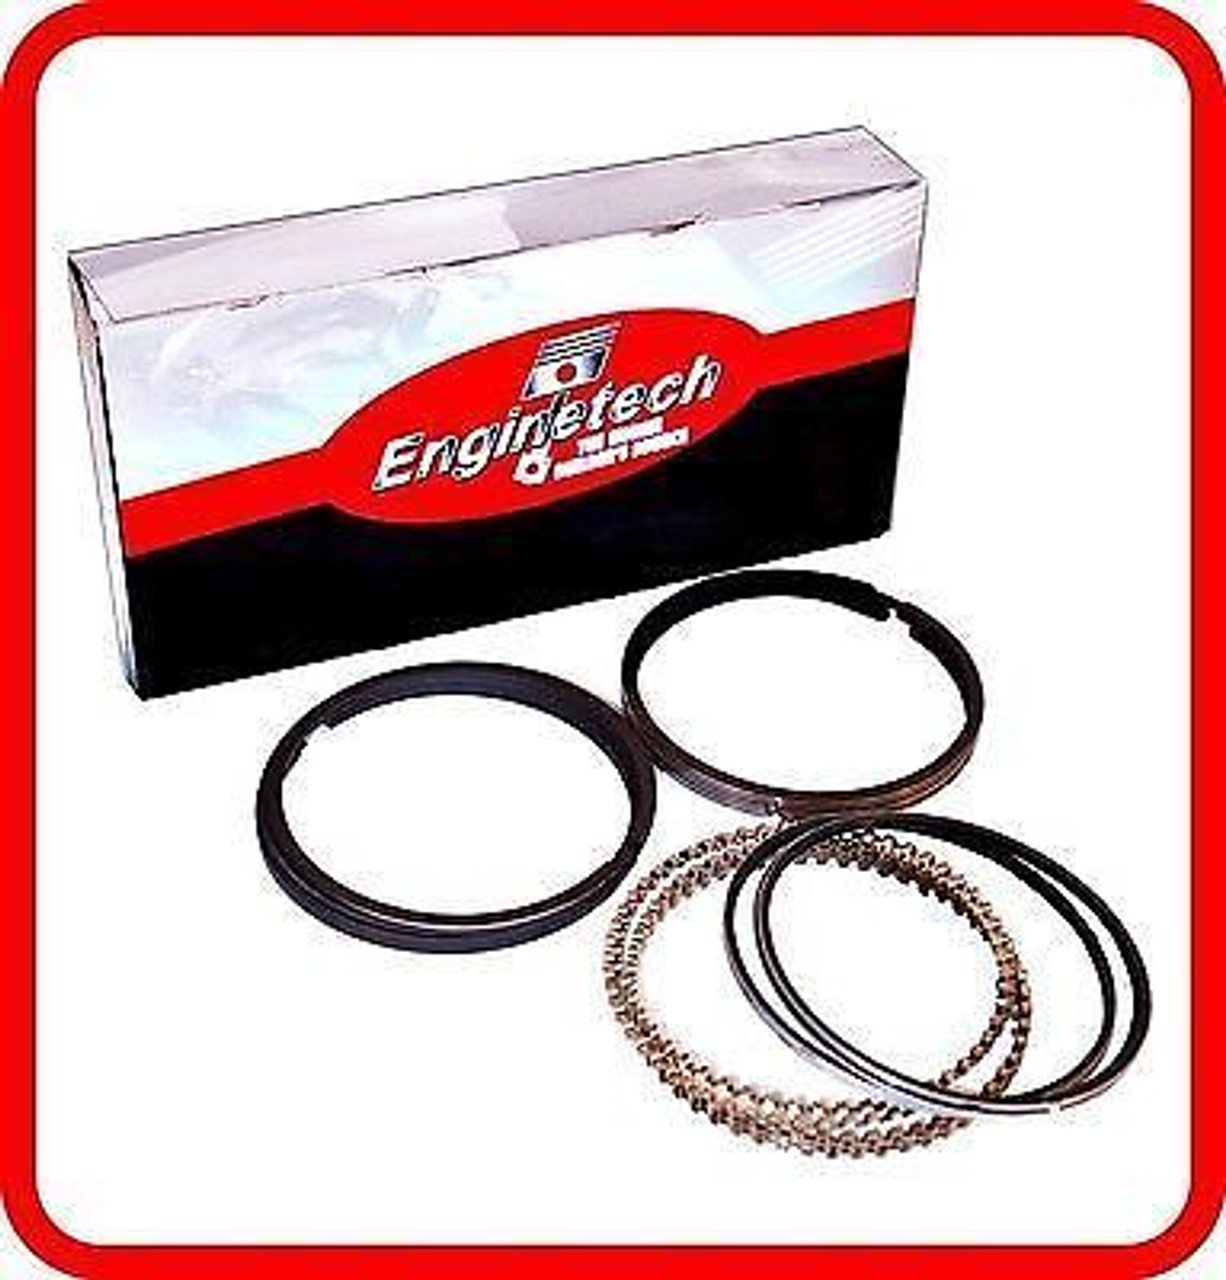 1995 Cadillac Commercial Chassis 5.7L Engine Piston Ring Set M10228 -180